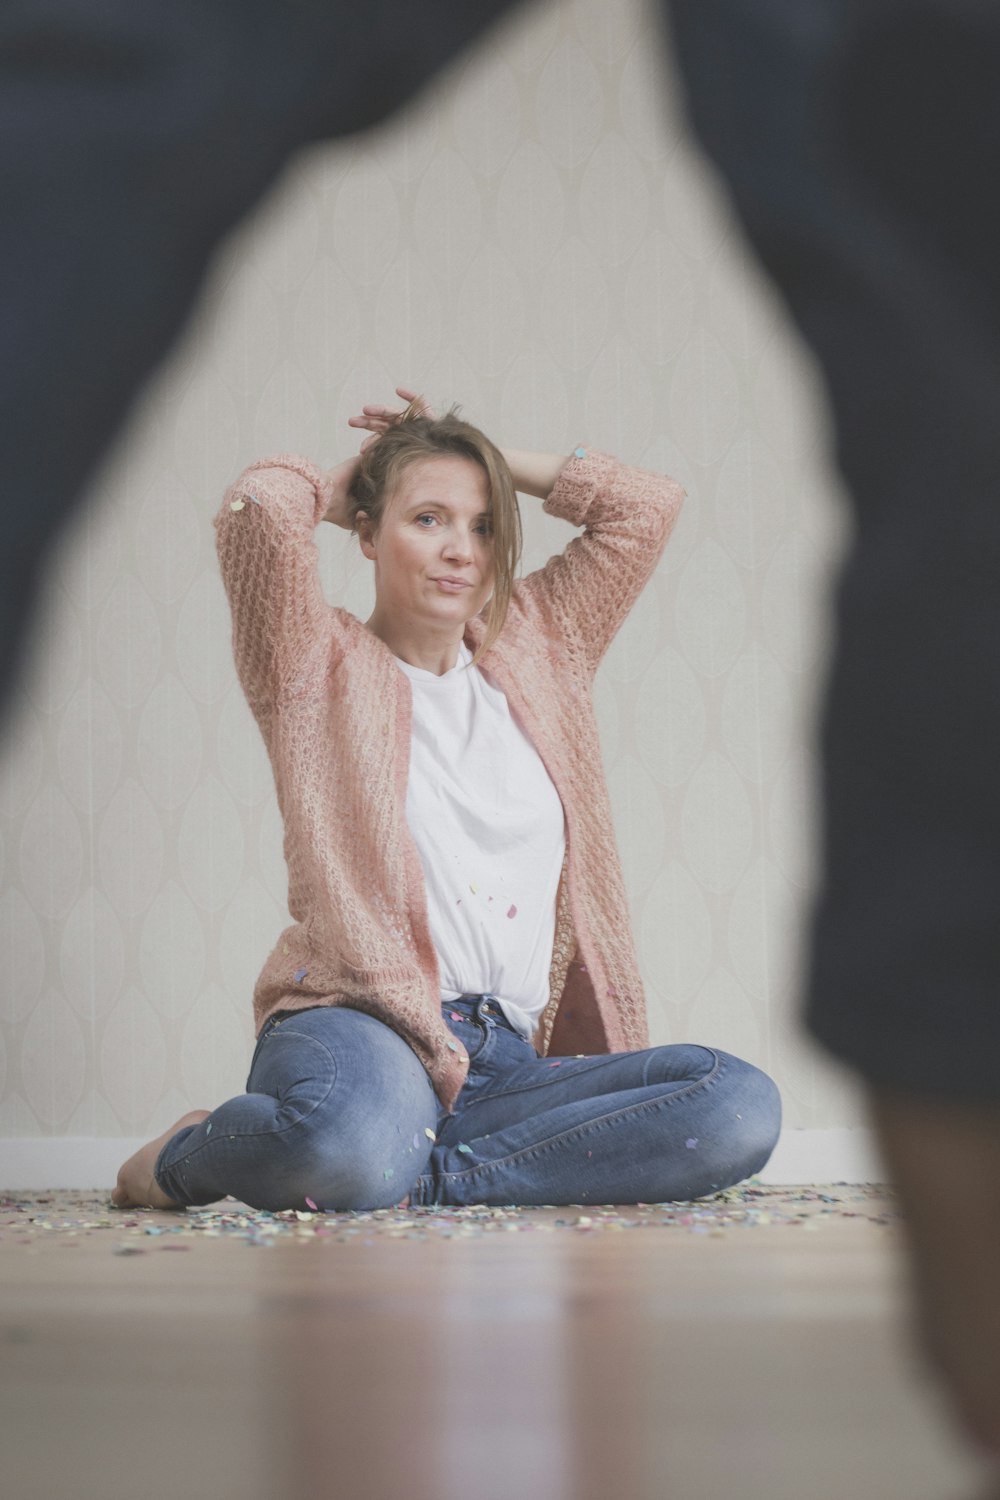 woman wearing beige sweater sitting while fixing her hair